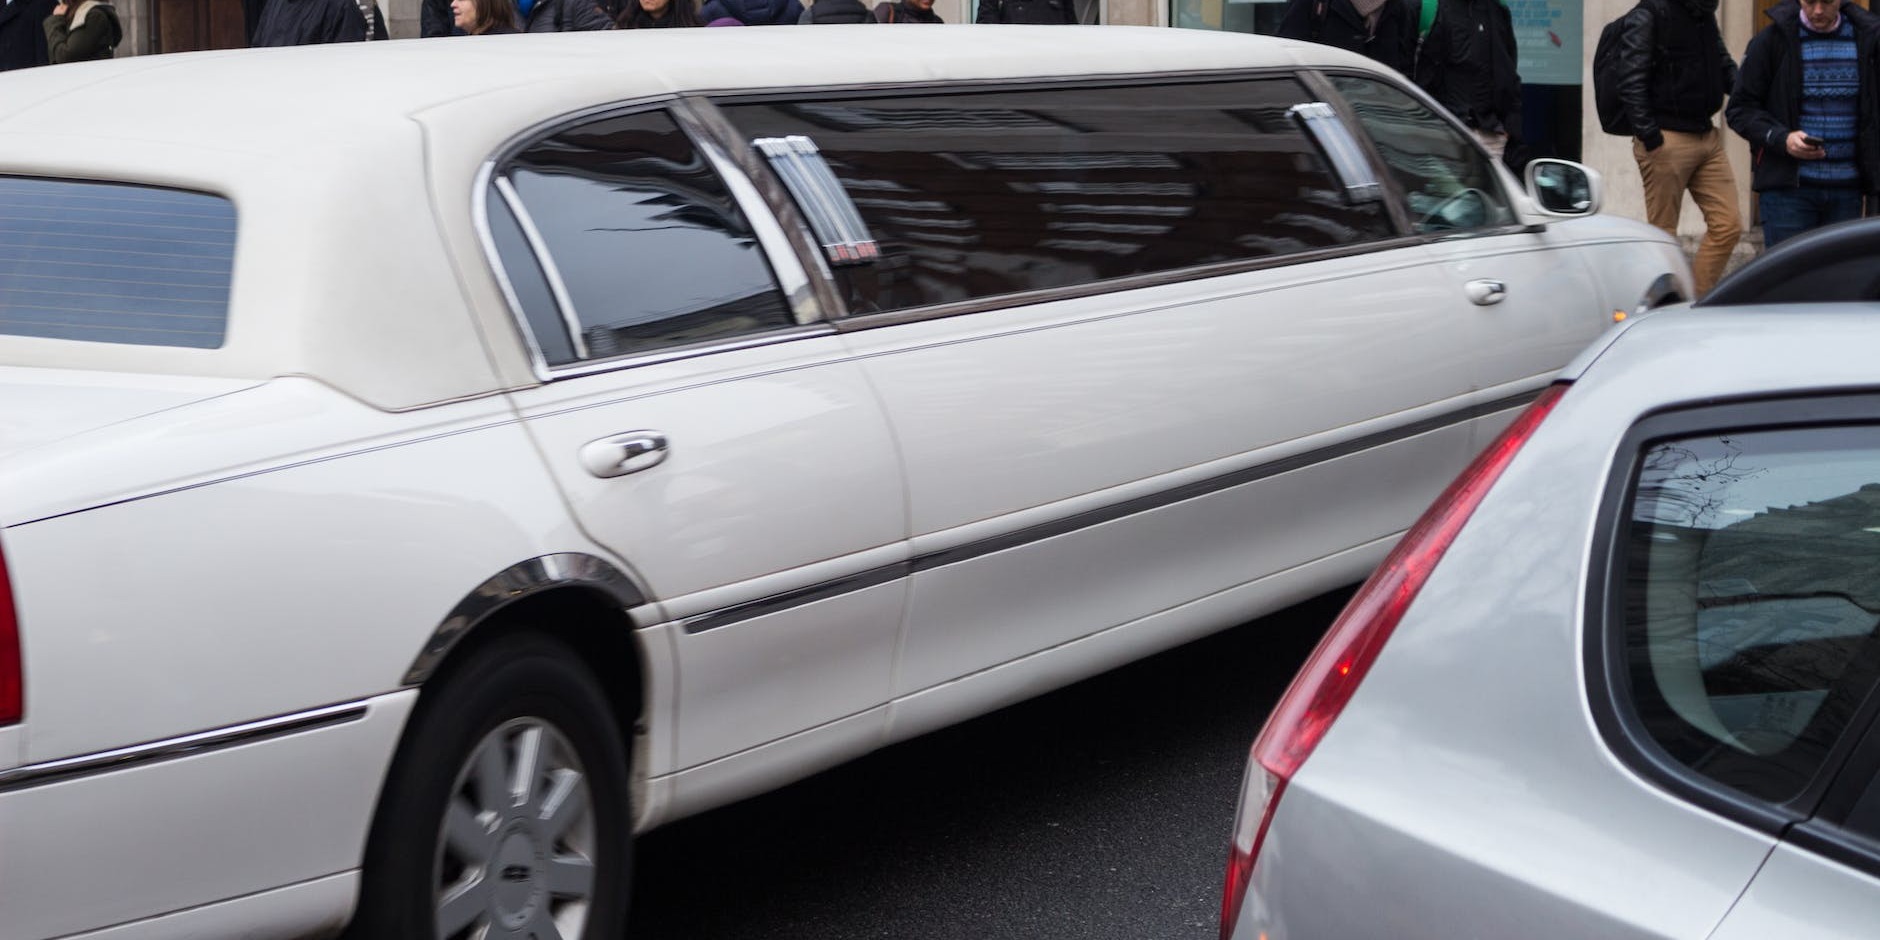 How to Make Your Special Occasion Extraordinary with Limo Hire